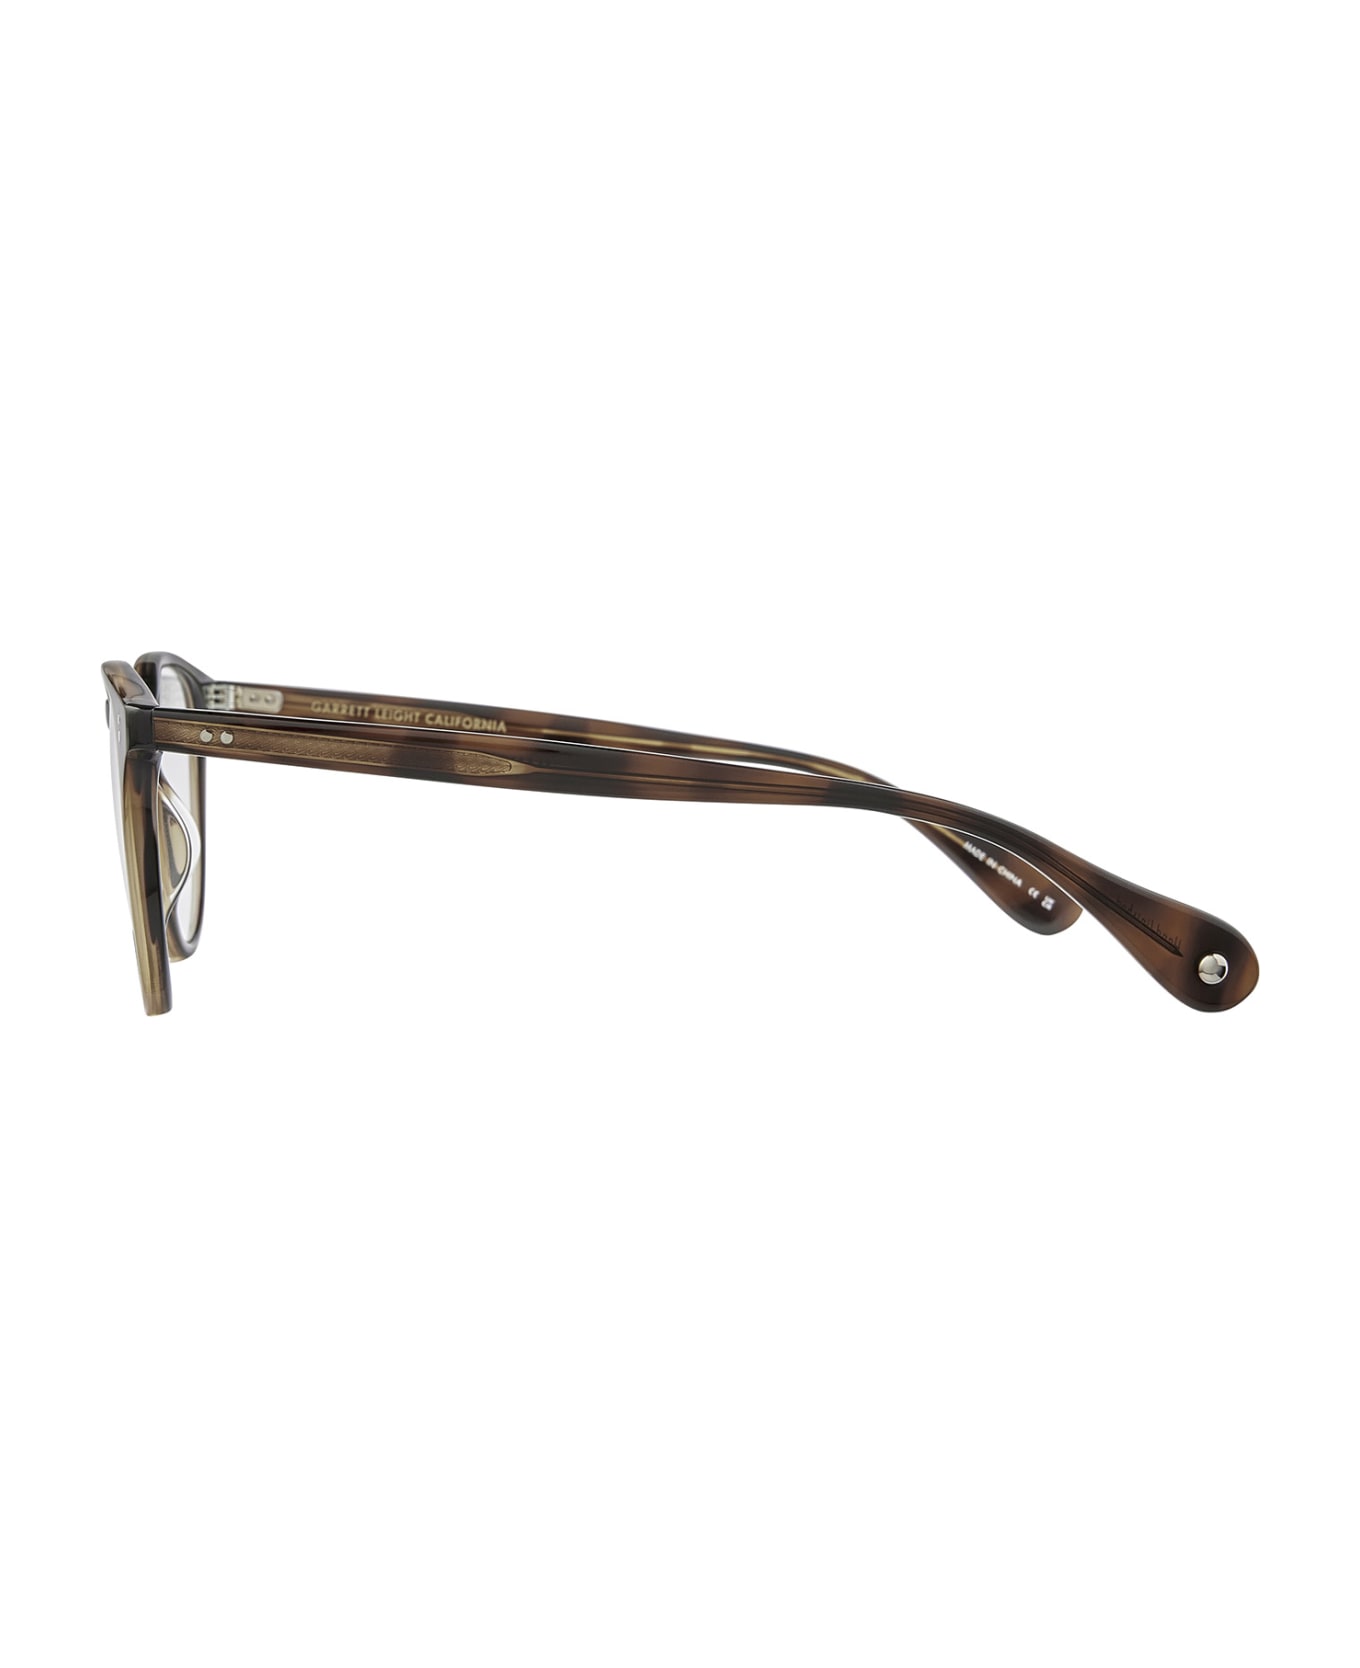 Garrett Leight Manzanita Spotted Brown Shell Glasses - Spotted Brown Shell アイウェア